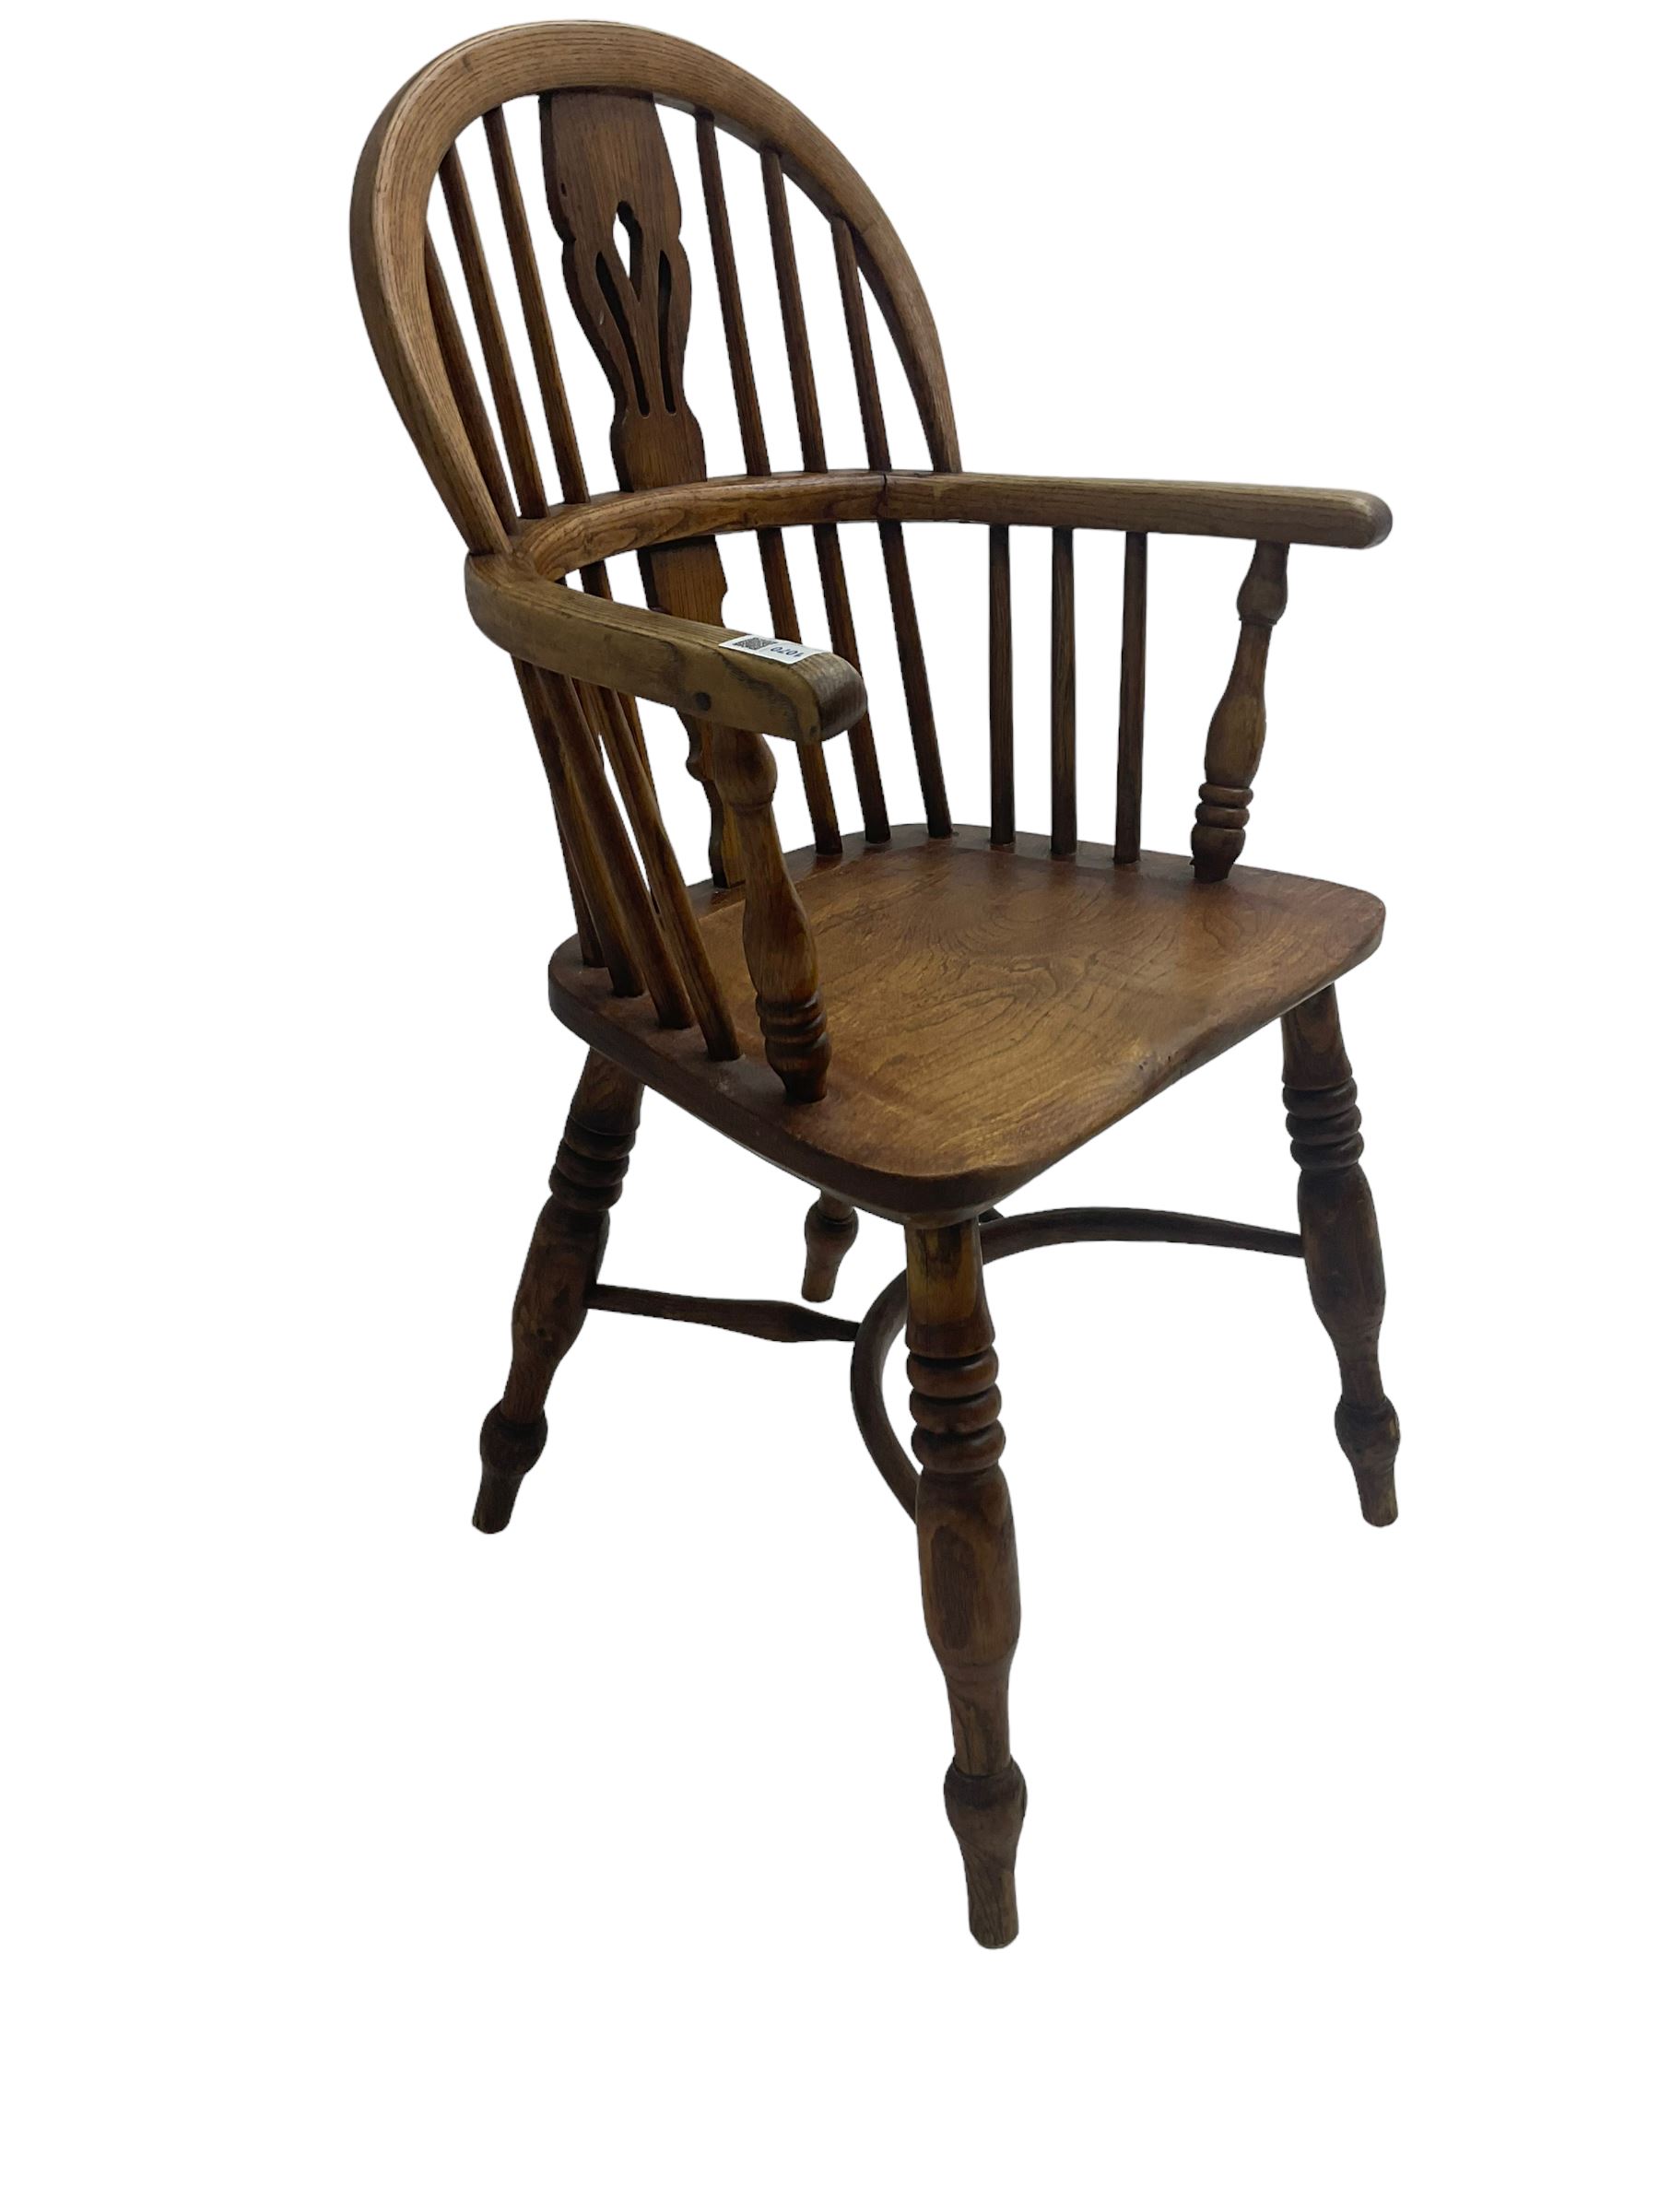 19th century elm and ash Windsor armchair - Image 6 of 6